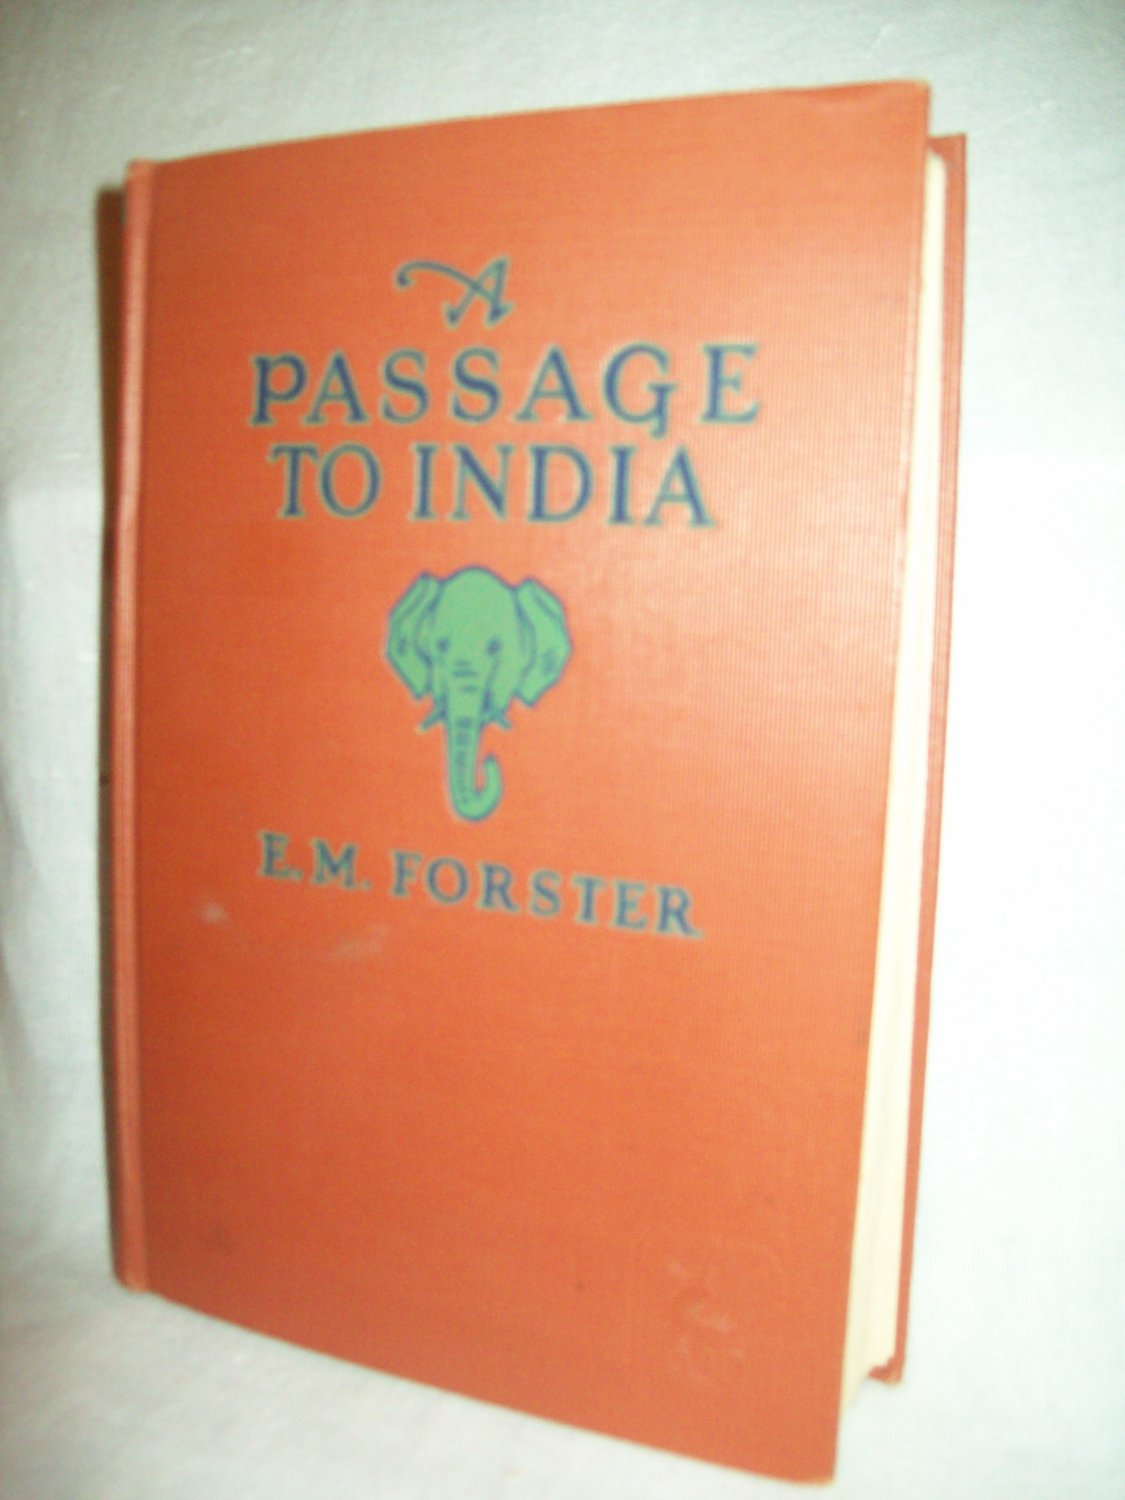 a passage to india by em forster